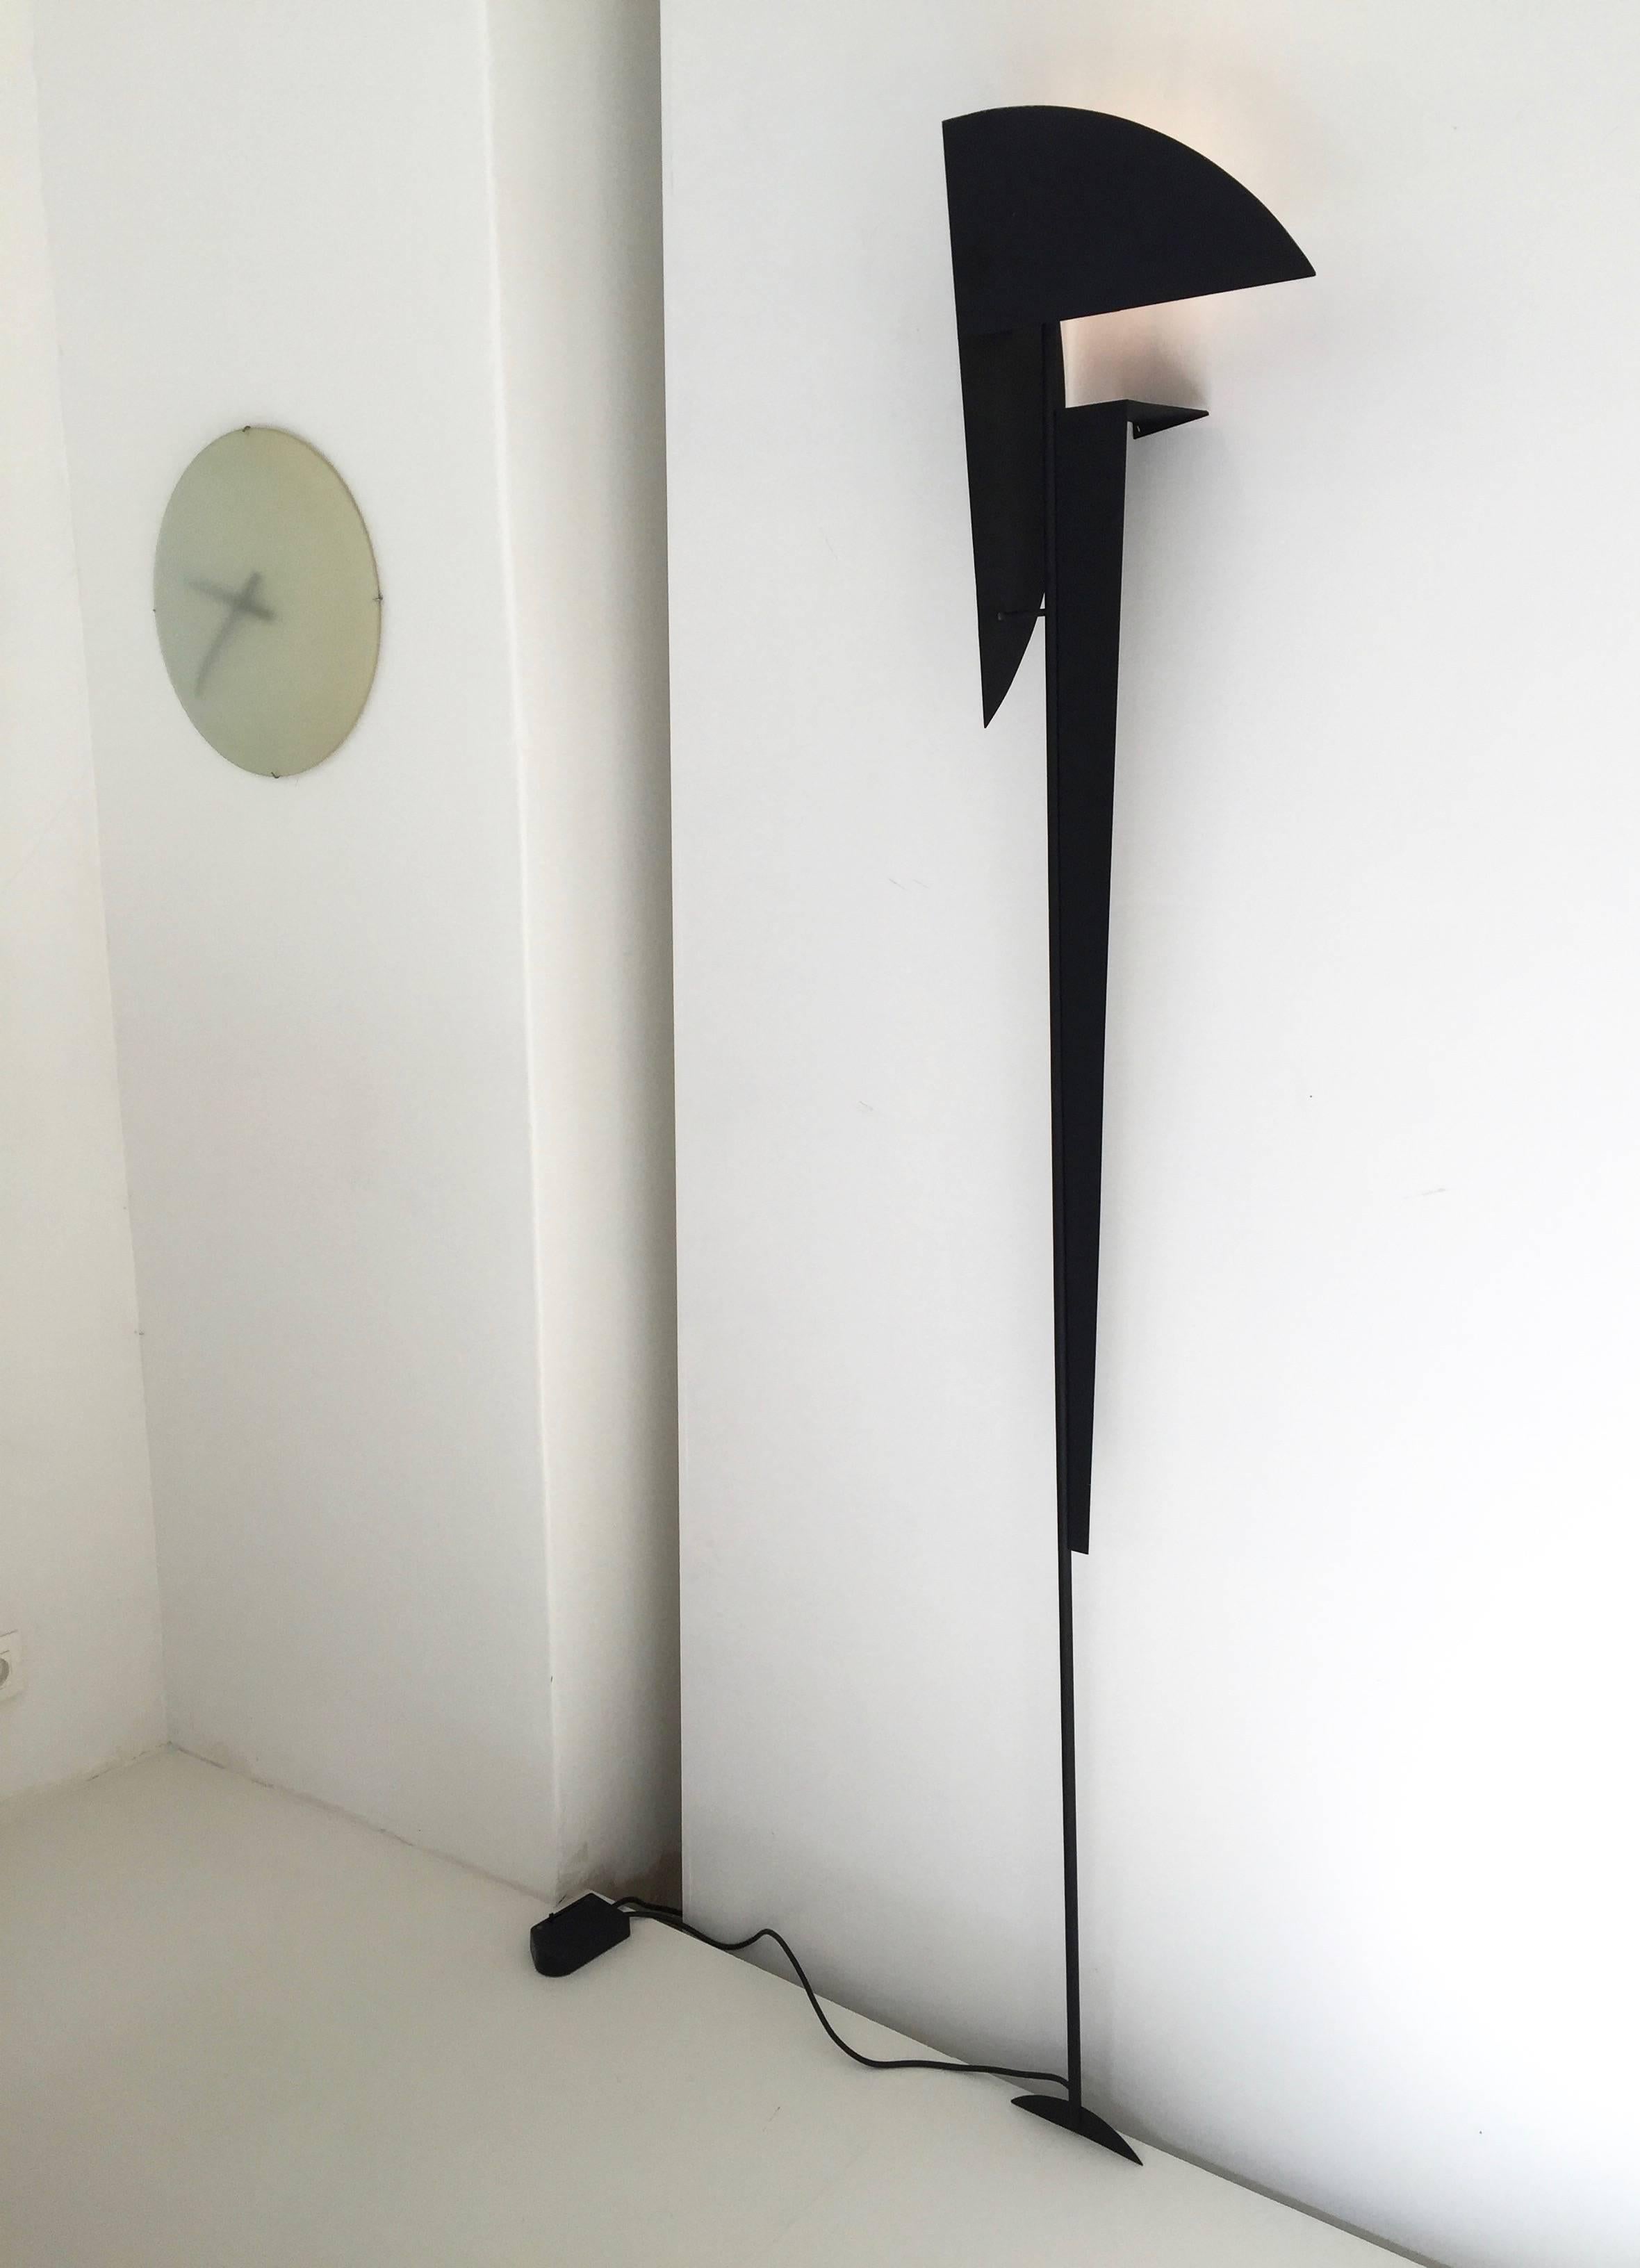 Unusual anonymous lamp sculpture attached against the wall and resting on the floor. It has a constructivist or abstract figurative approach. It is made in thin lacquered metal and has a normal light bulb as light source which is disable with a foot